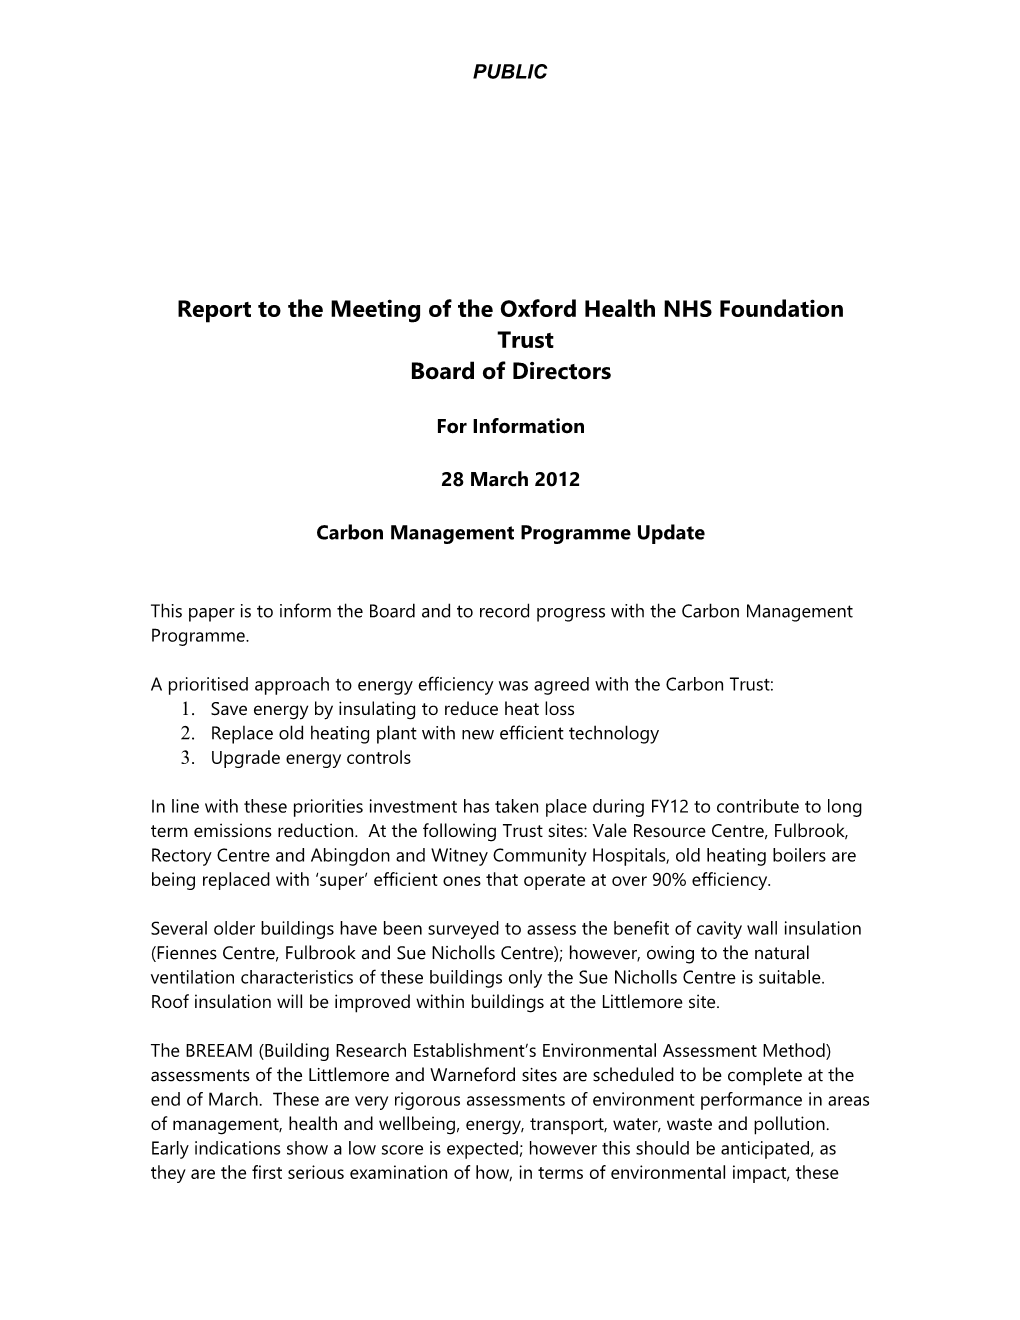 Report to the Meeting of the Oxfordhealth NHS Foundation Trust